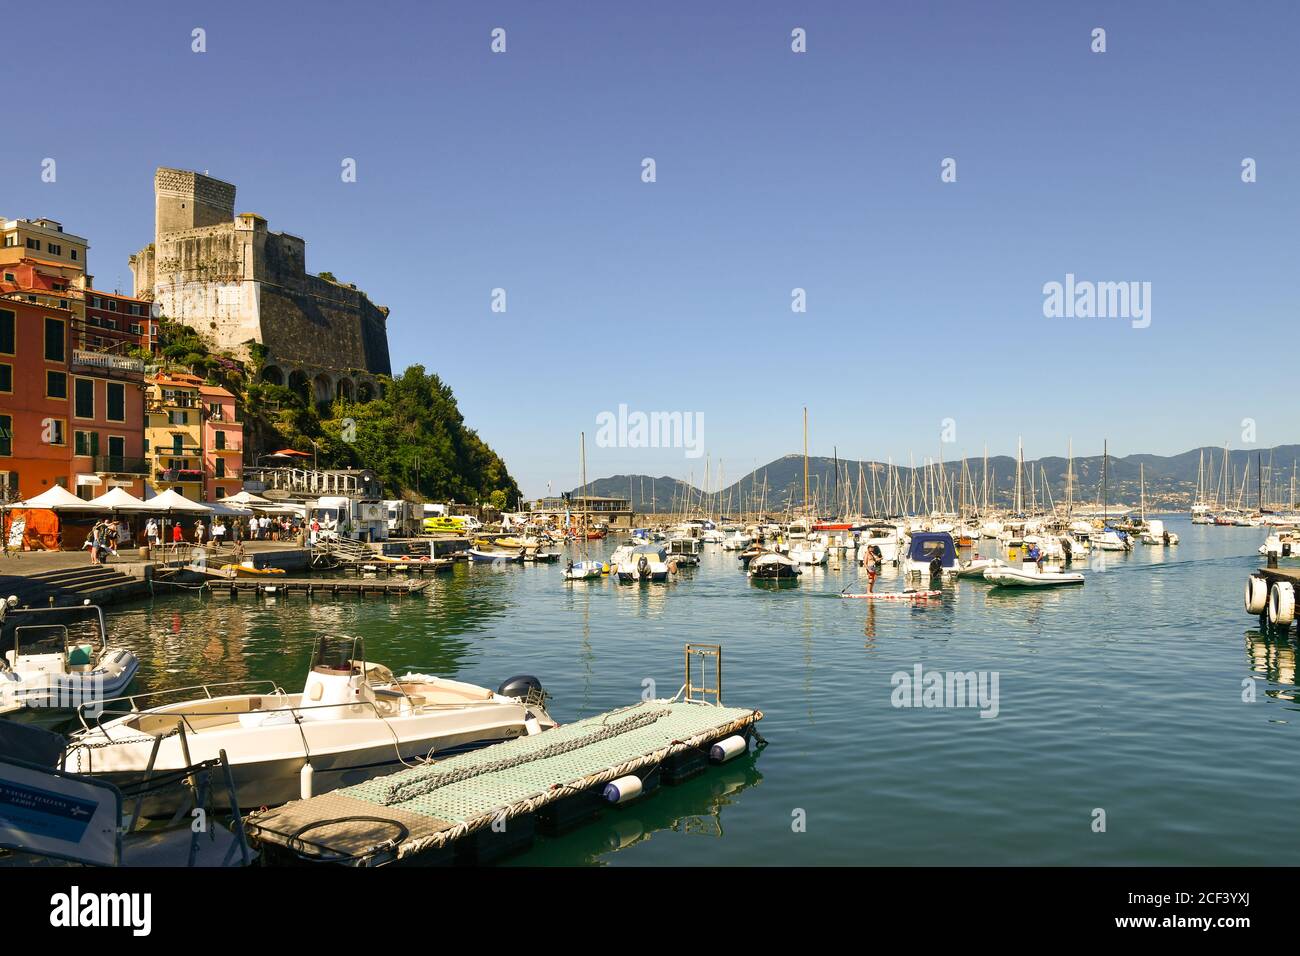 Scenic view of the harbor with the medieval castle overlooking the Gulf of Poets and the promontory of Porto Venere in the background, Lerici, Italy Stock Photo